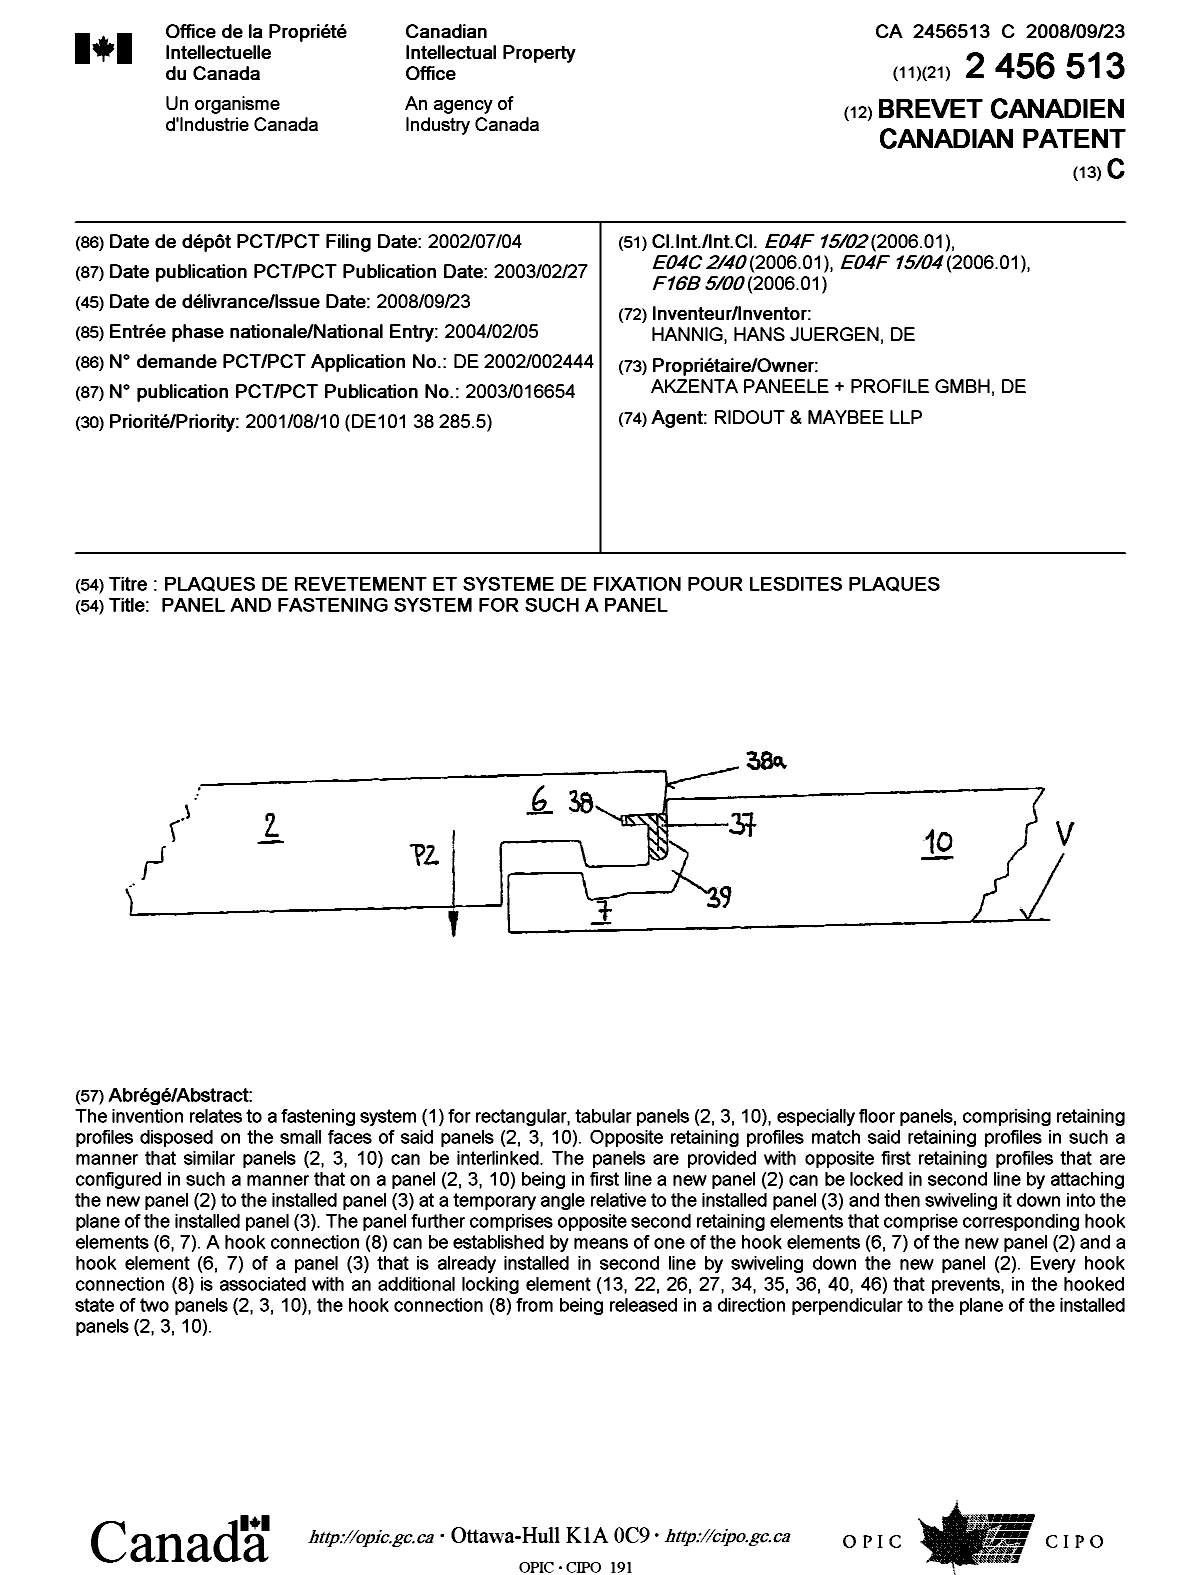 Canadian Patent Document 2456513. Cover Page 20080912. Image 1 of 1